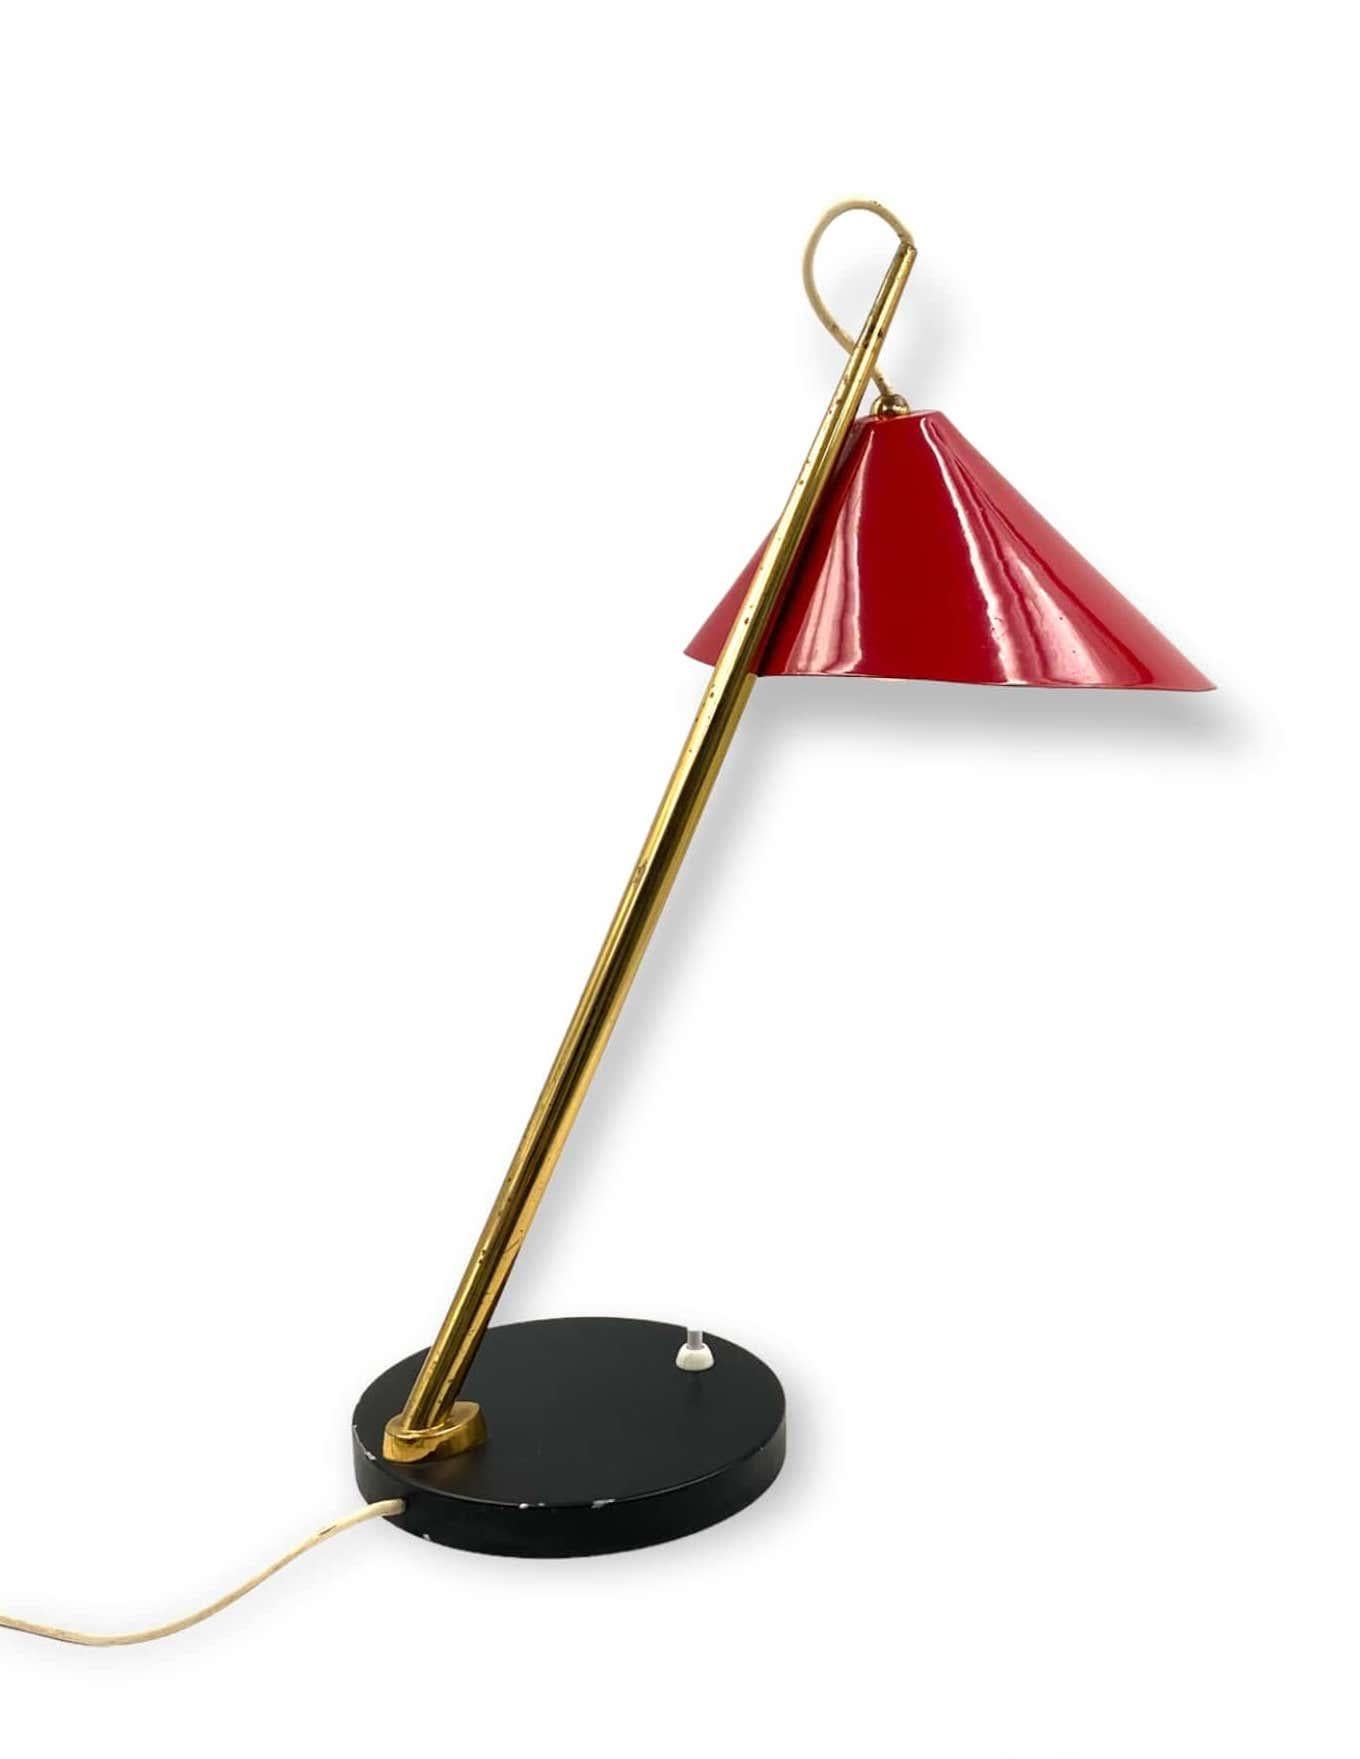 Midcentury Red Table Lamp, Lumen, Italy, 1960s For Sale 2